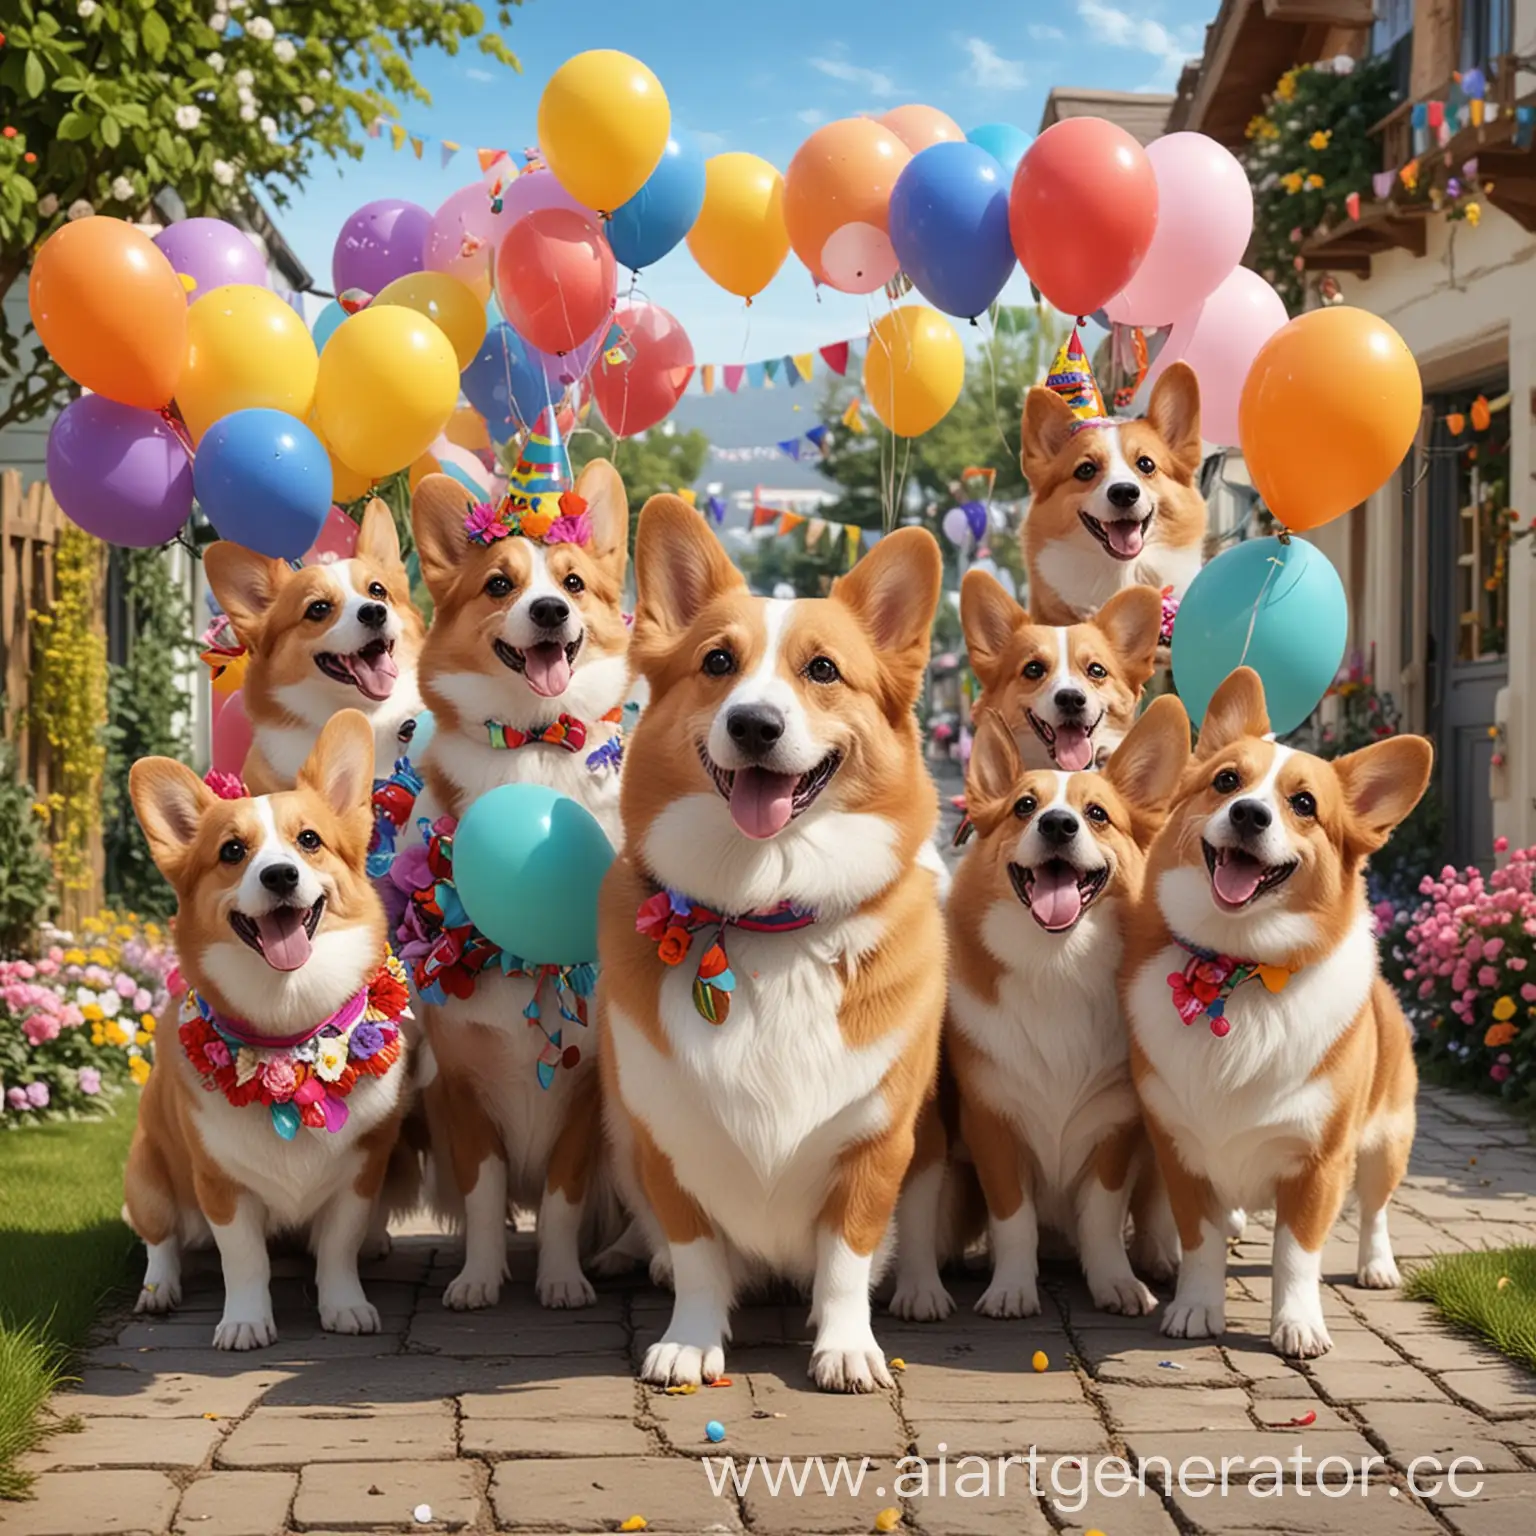 Birthday-Celebration-with-Friends-and-Corgi-Dogs-in-Festive-Costumes